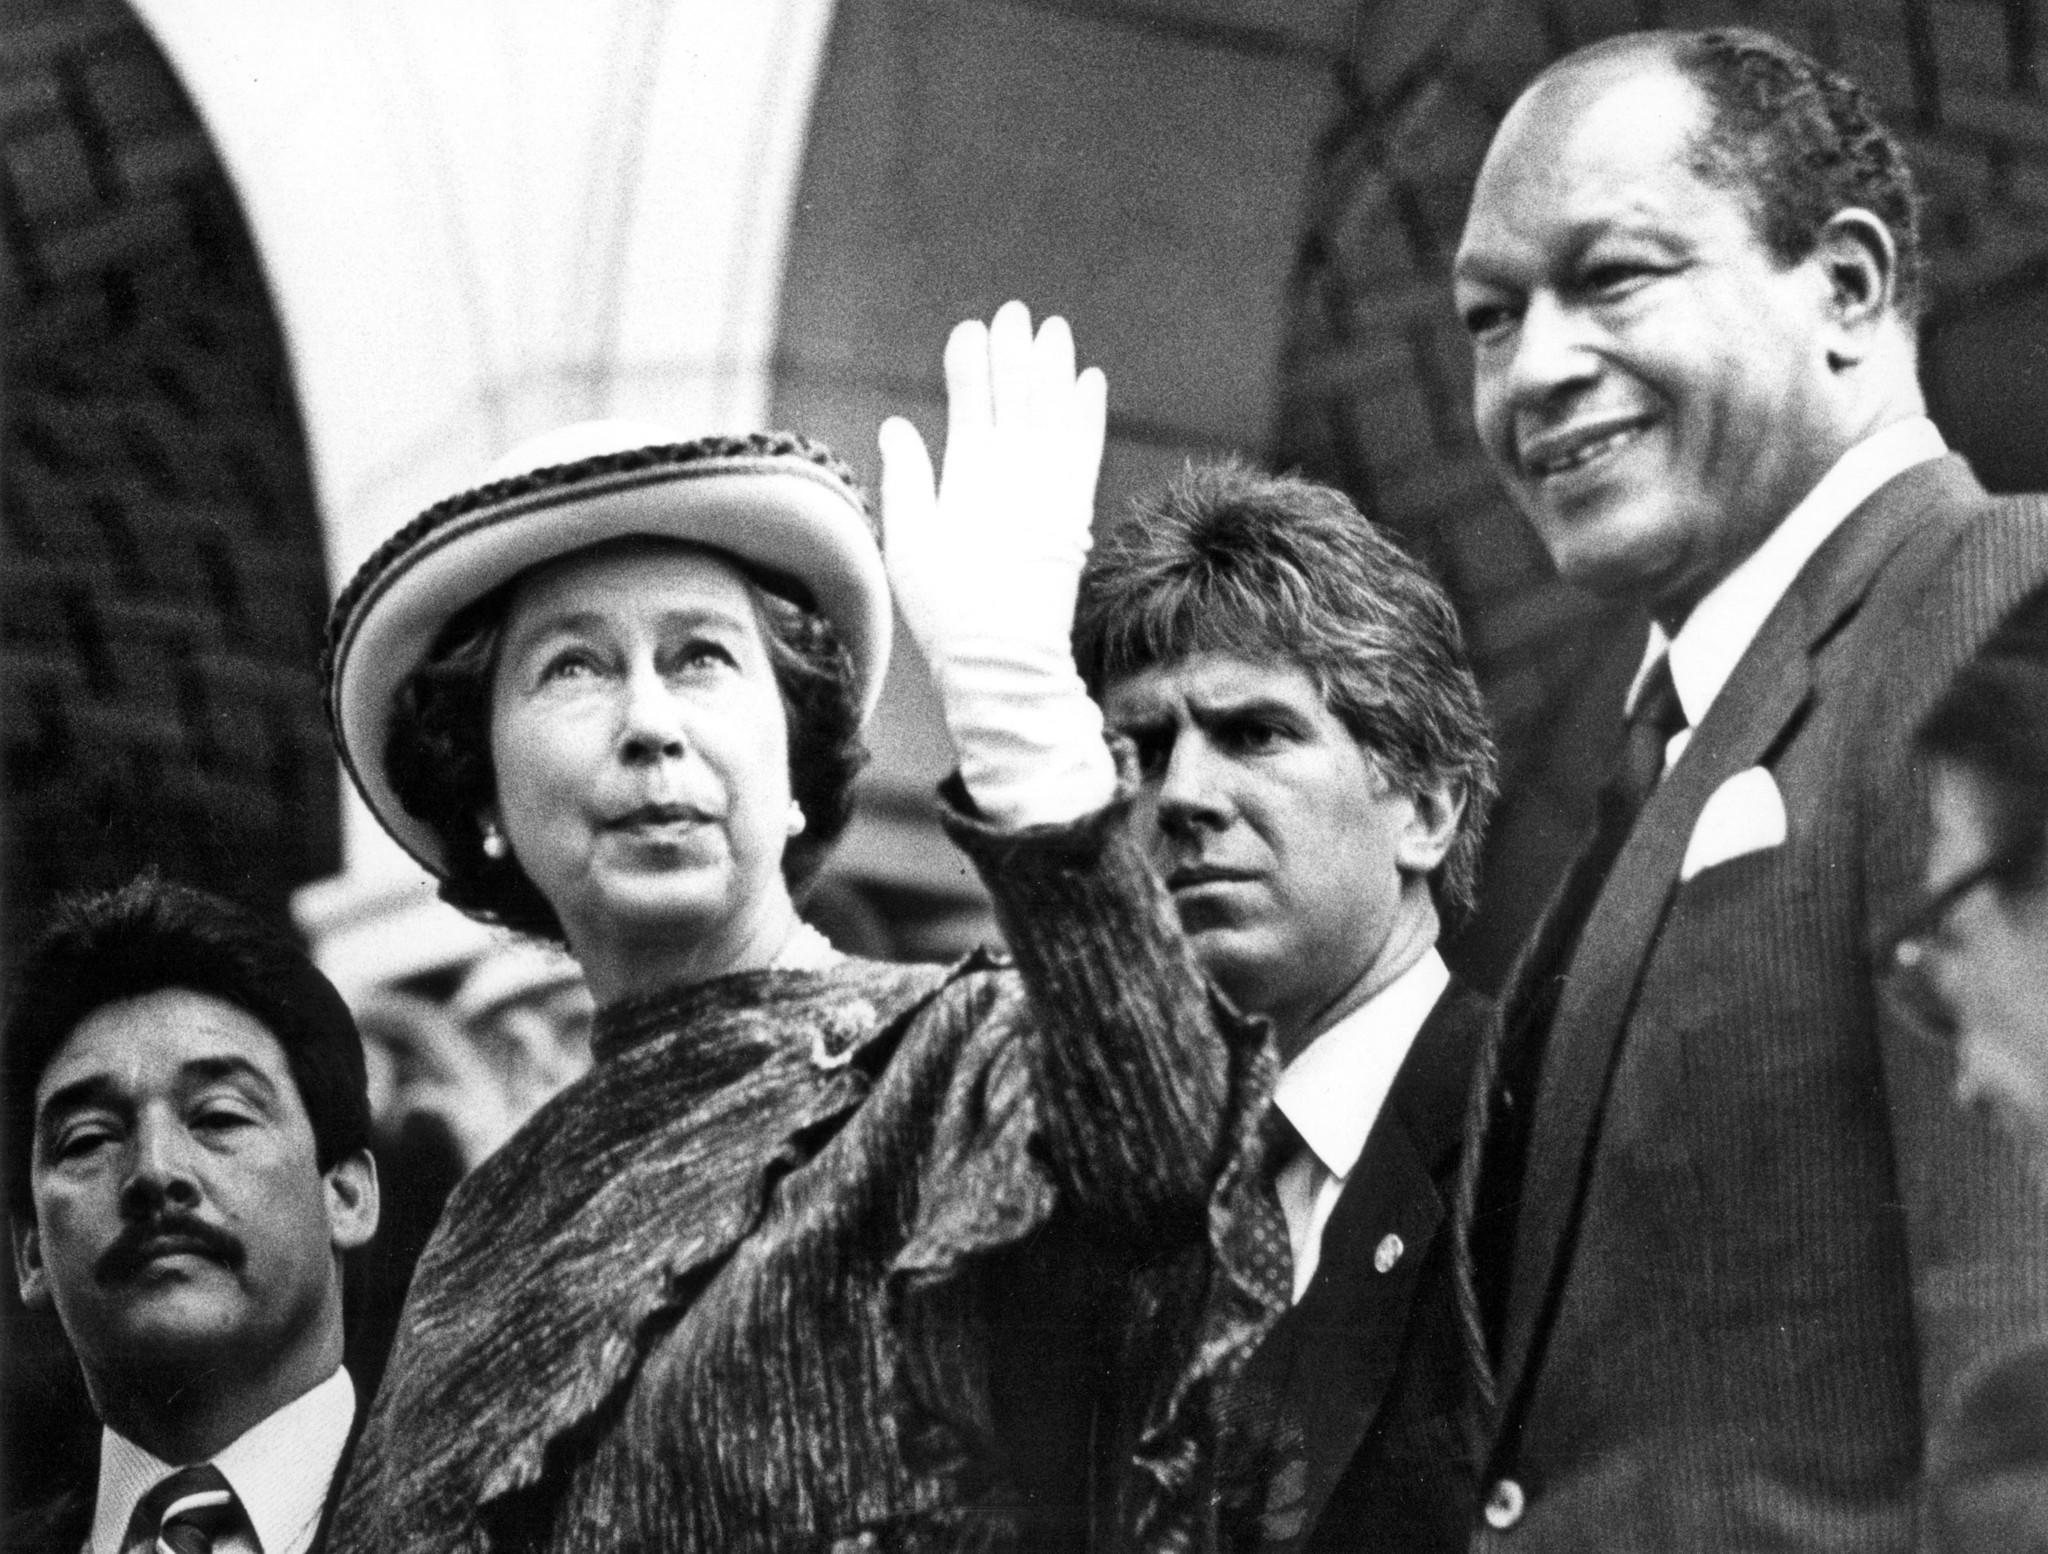 Feb. 28, 1983: Queen Elizabeth II waves to a crowd while being escorted into Los Angeles City Hall by Mayor Tom Bradley. This photo was published in the March 1, 1983, Los Angeles Times.